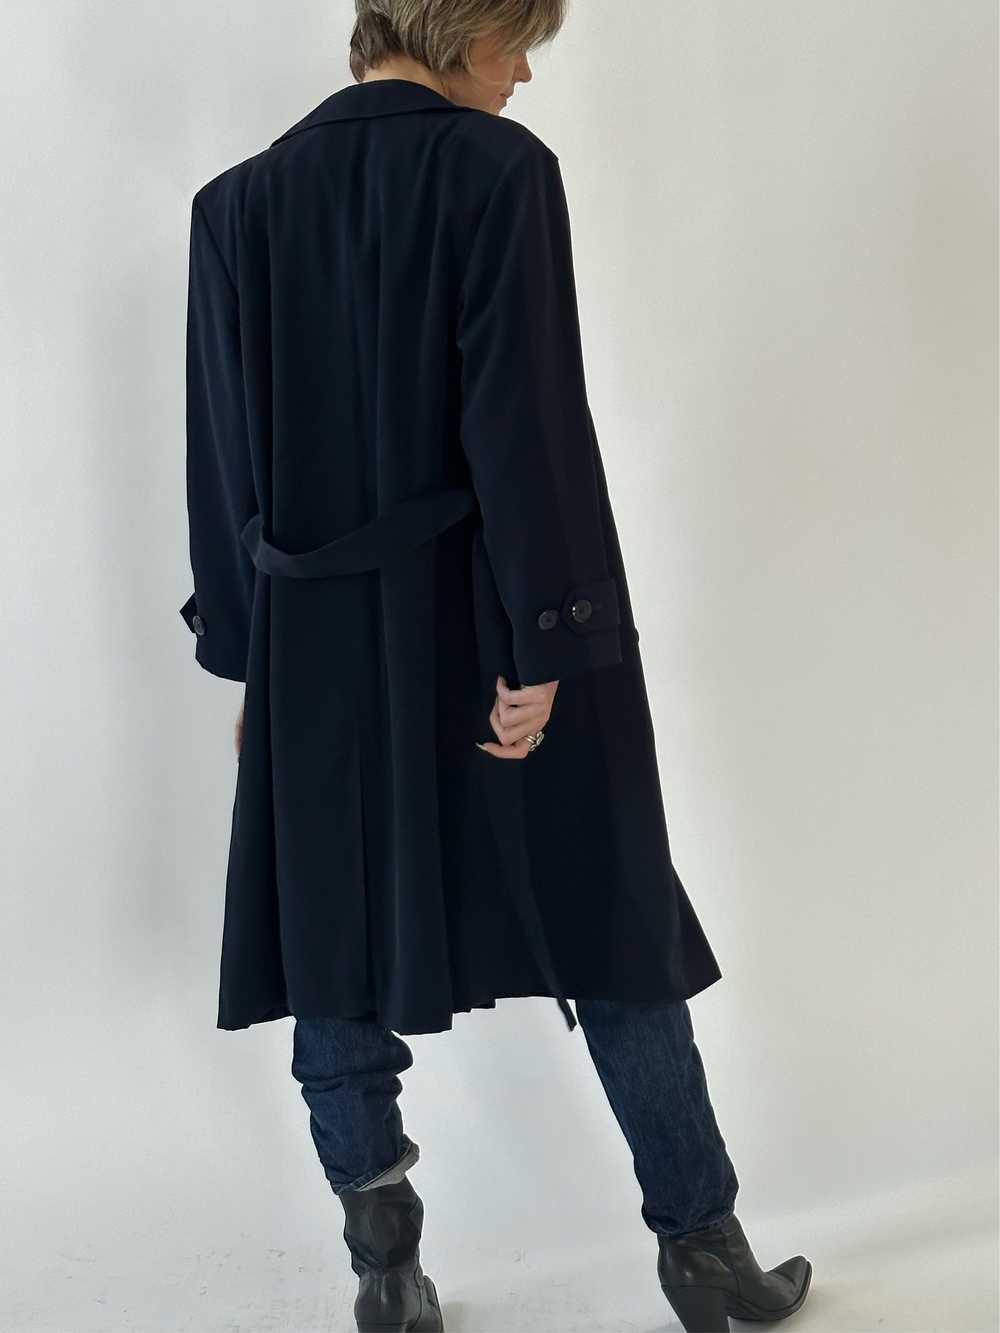 Vintage Navy Petite Trench - image 7